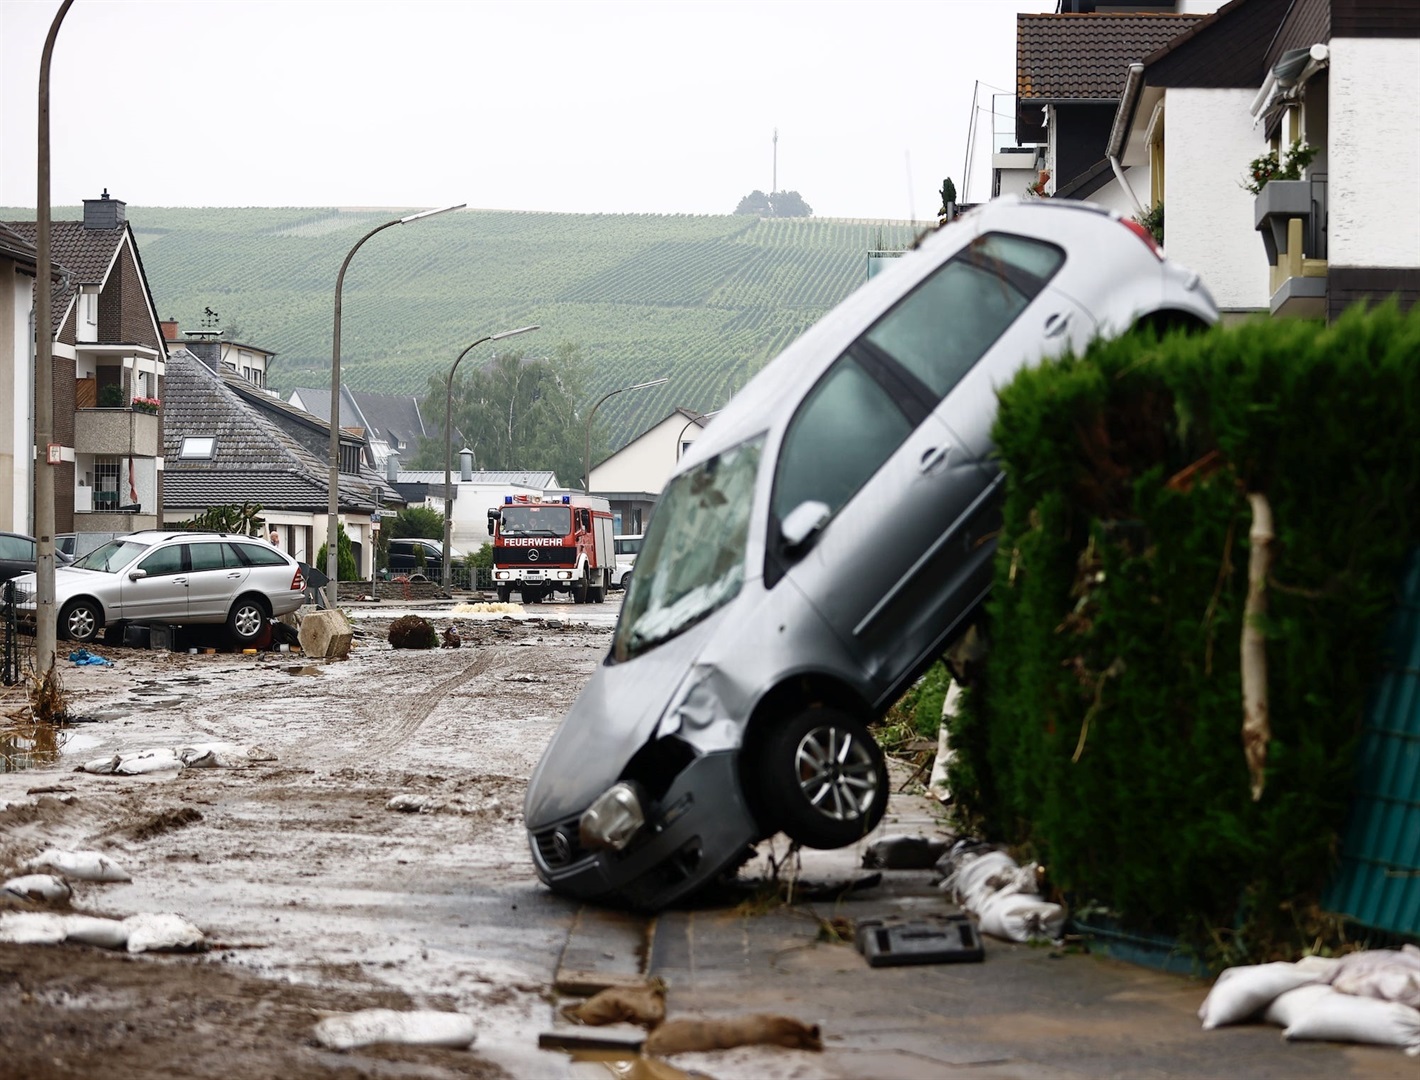 A view of flood devastated area after severe rainstorm and flash floods hit western states of Rhineland-Palatinate and North Rhine-Westphalia, on July 16, 2021, in Ahrweiler district of Rhineland-Palatinate, Germany.
